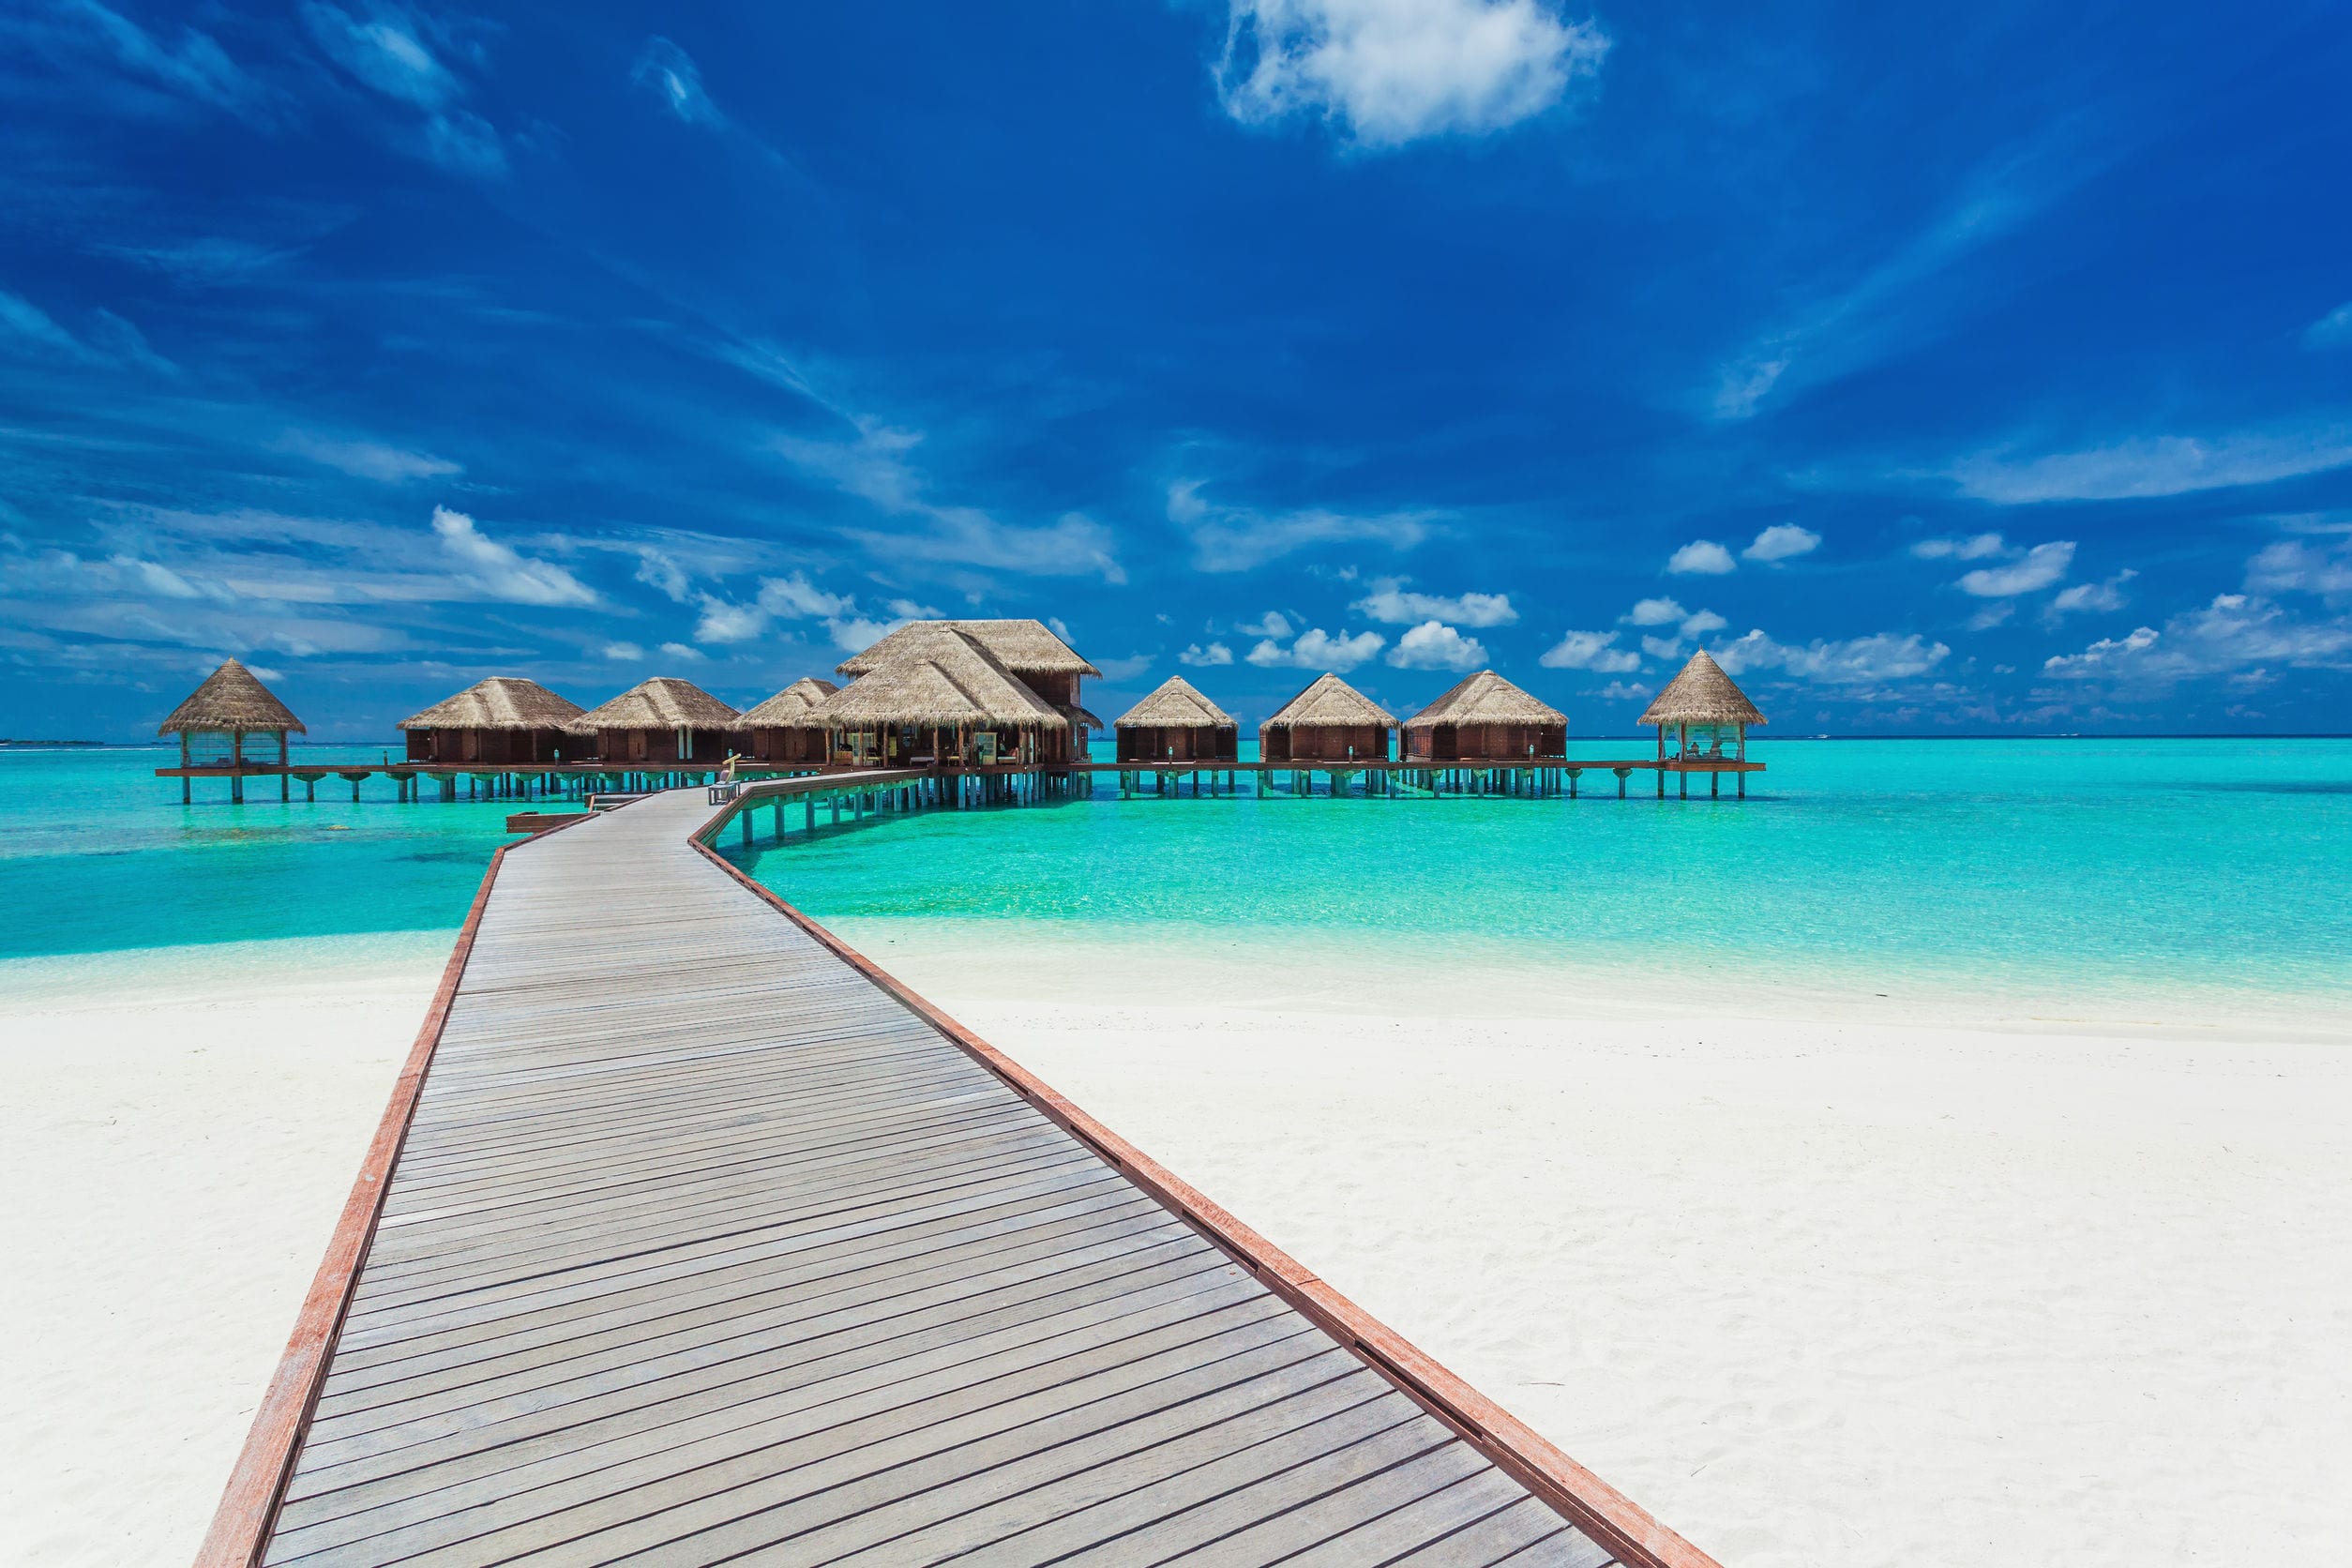 Maldives Says Come Visit, But Only If You've Got 14 Days & Cash To Burn